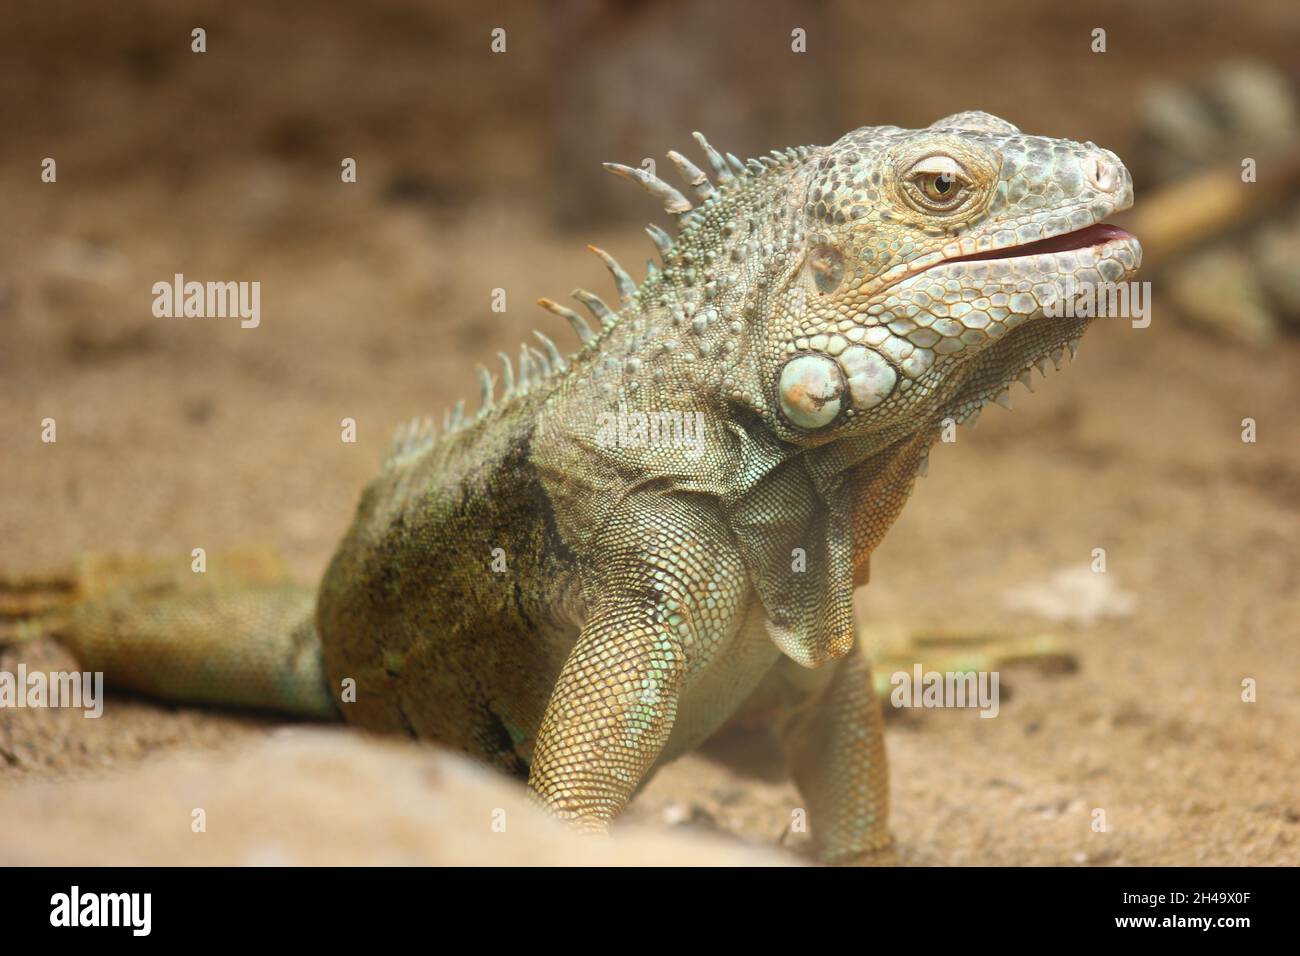 animal scale,animal head,animal body part,looking,Looking away,Sunlight,outdoors,Land,focus on foreground,day,Nature,Iguana,close-up,no people,animal Stock Photo